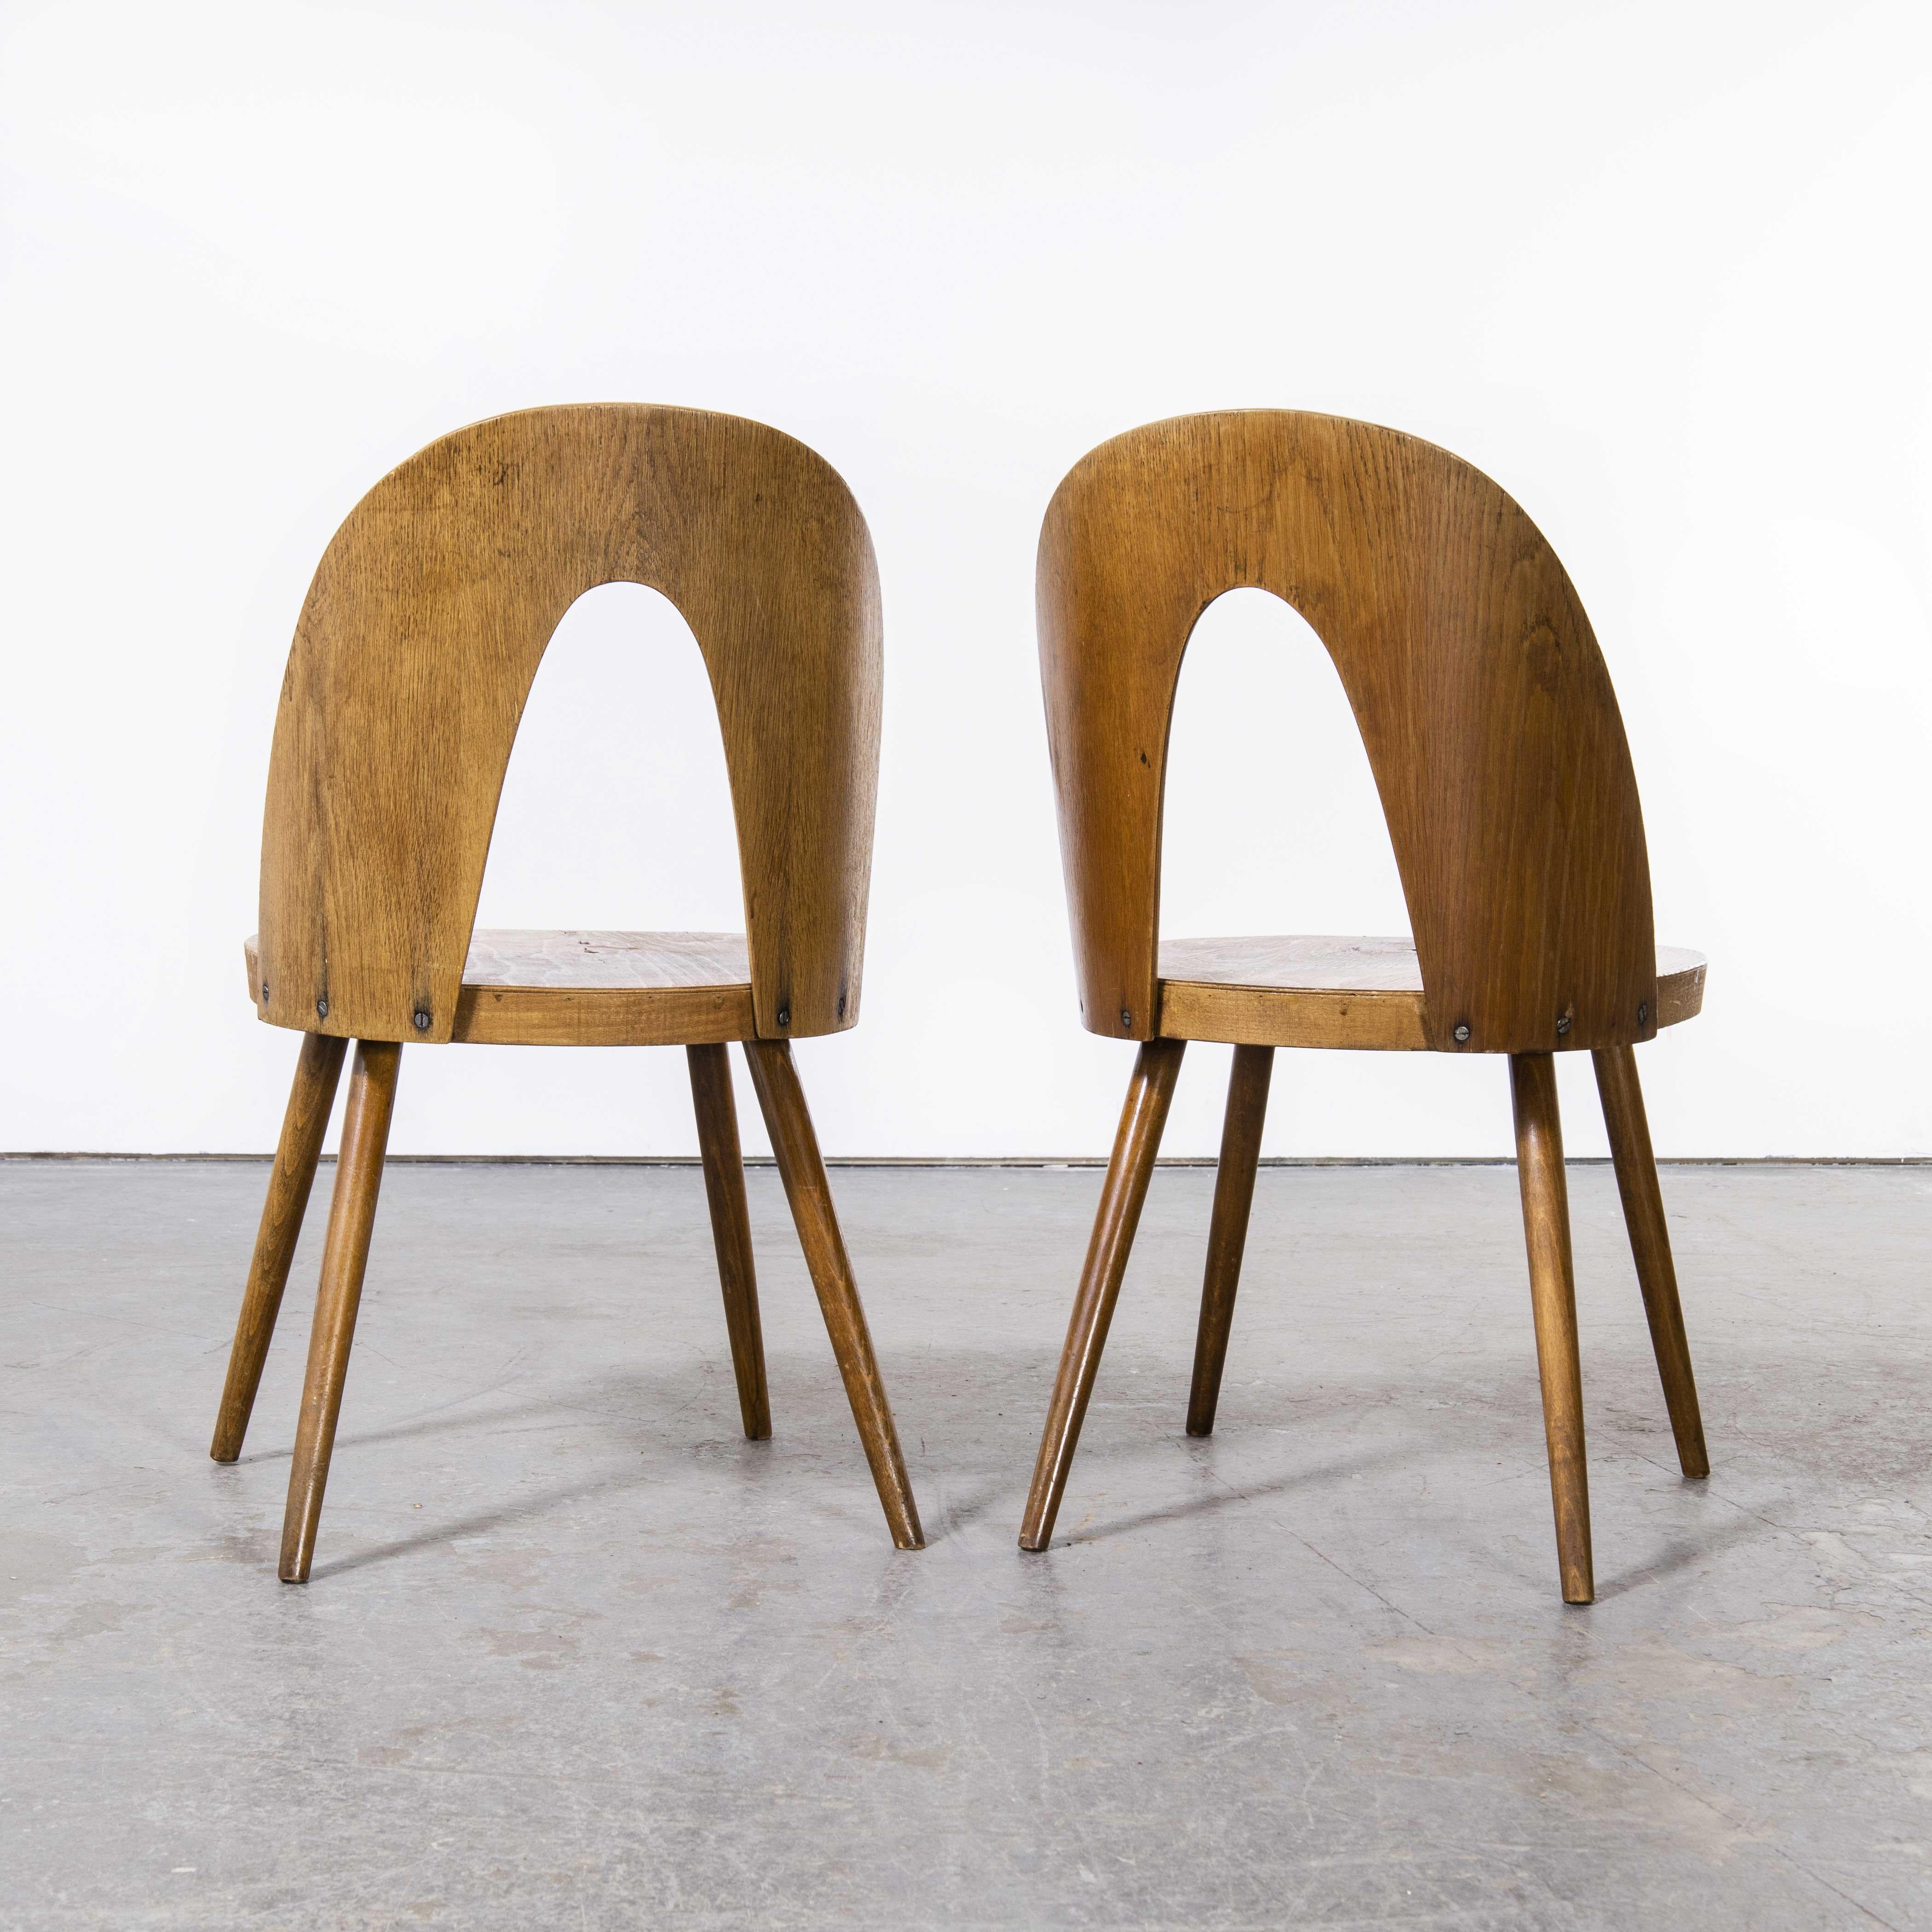 1960s Side, Dining Chairs by Antonin Suman for Ton, Pair In Good Condition For Sale In Hook, Hampshire